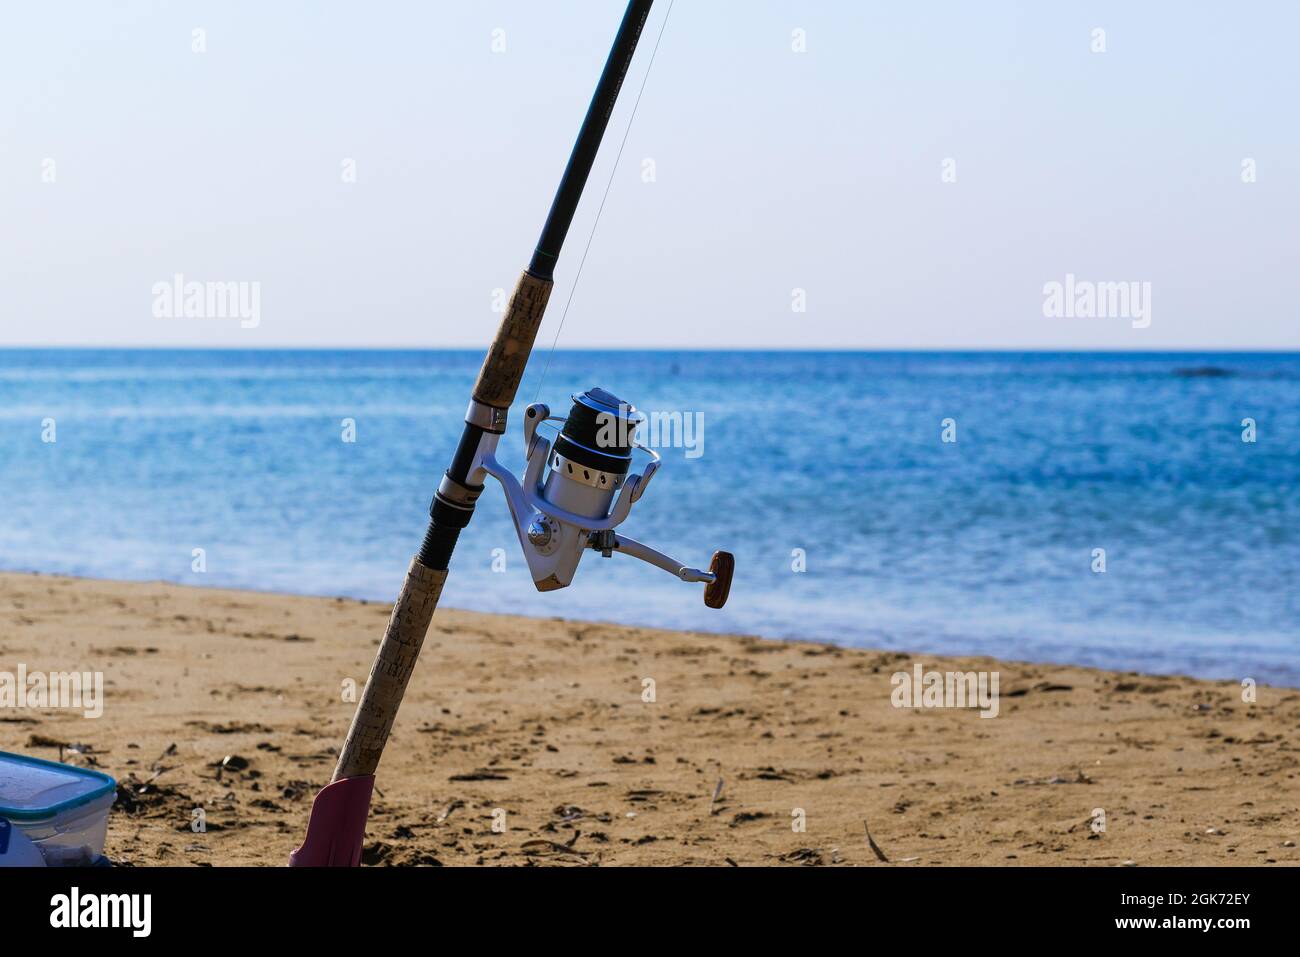 Fishing rod with spinning reel on beach. Saltwater fishing on sea